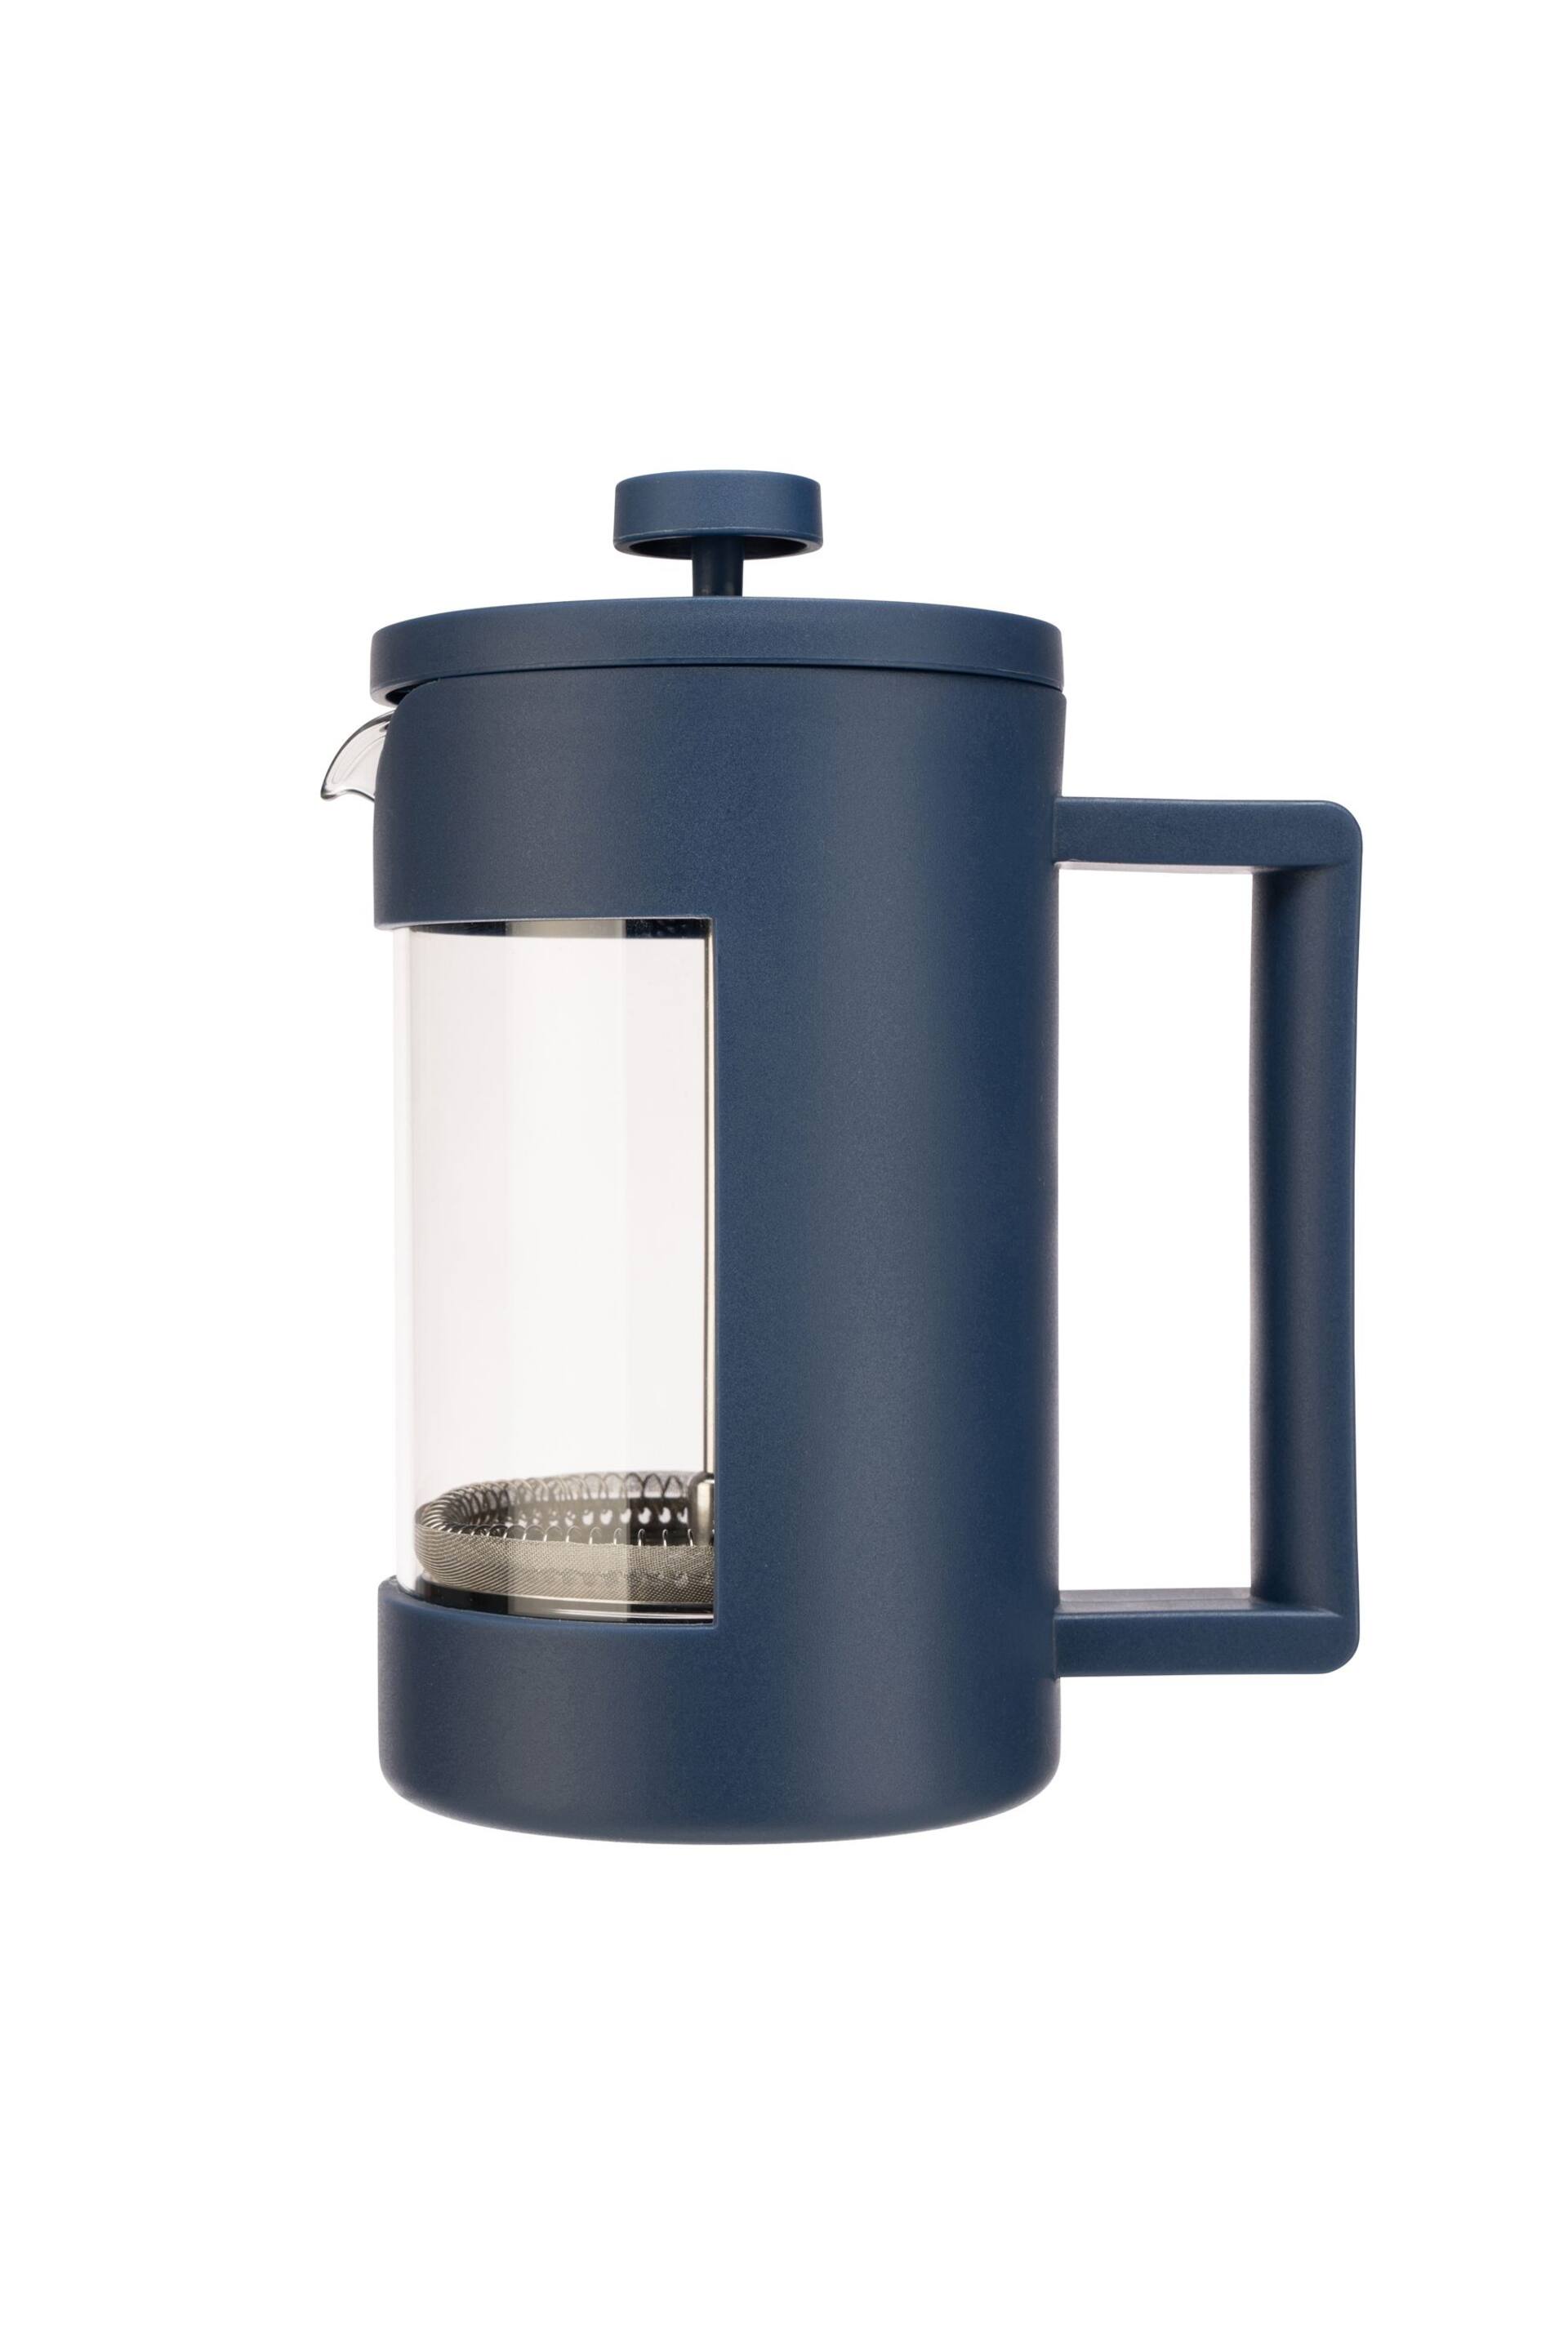 SIIP Blue 6 Cup Cafetiere - Image 2 of 4